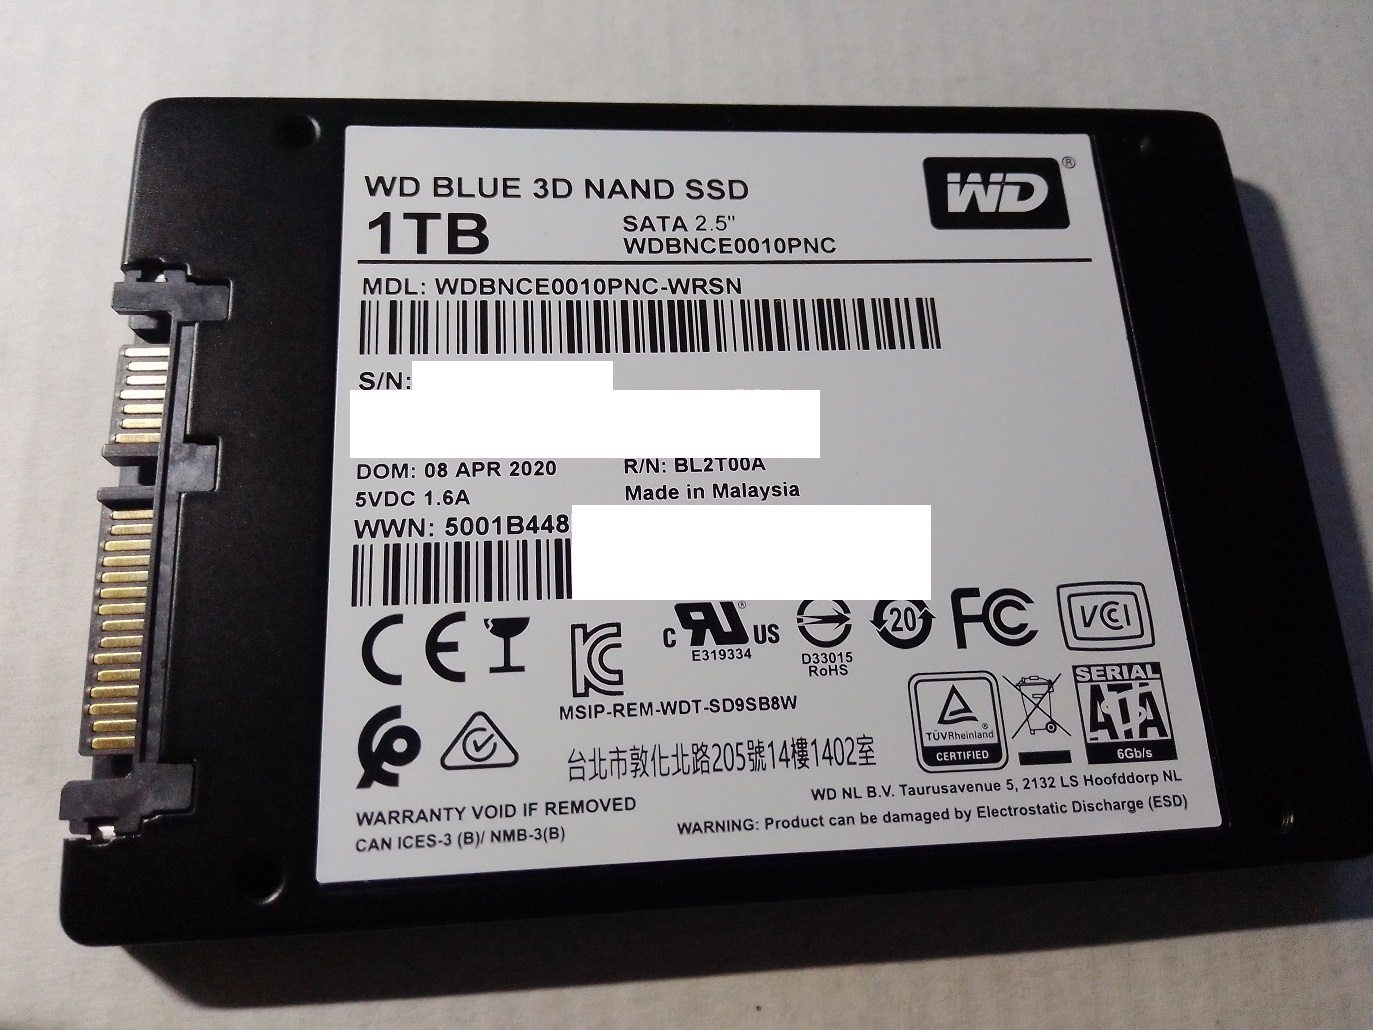 2 different versions of wd blue 3D 2.5